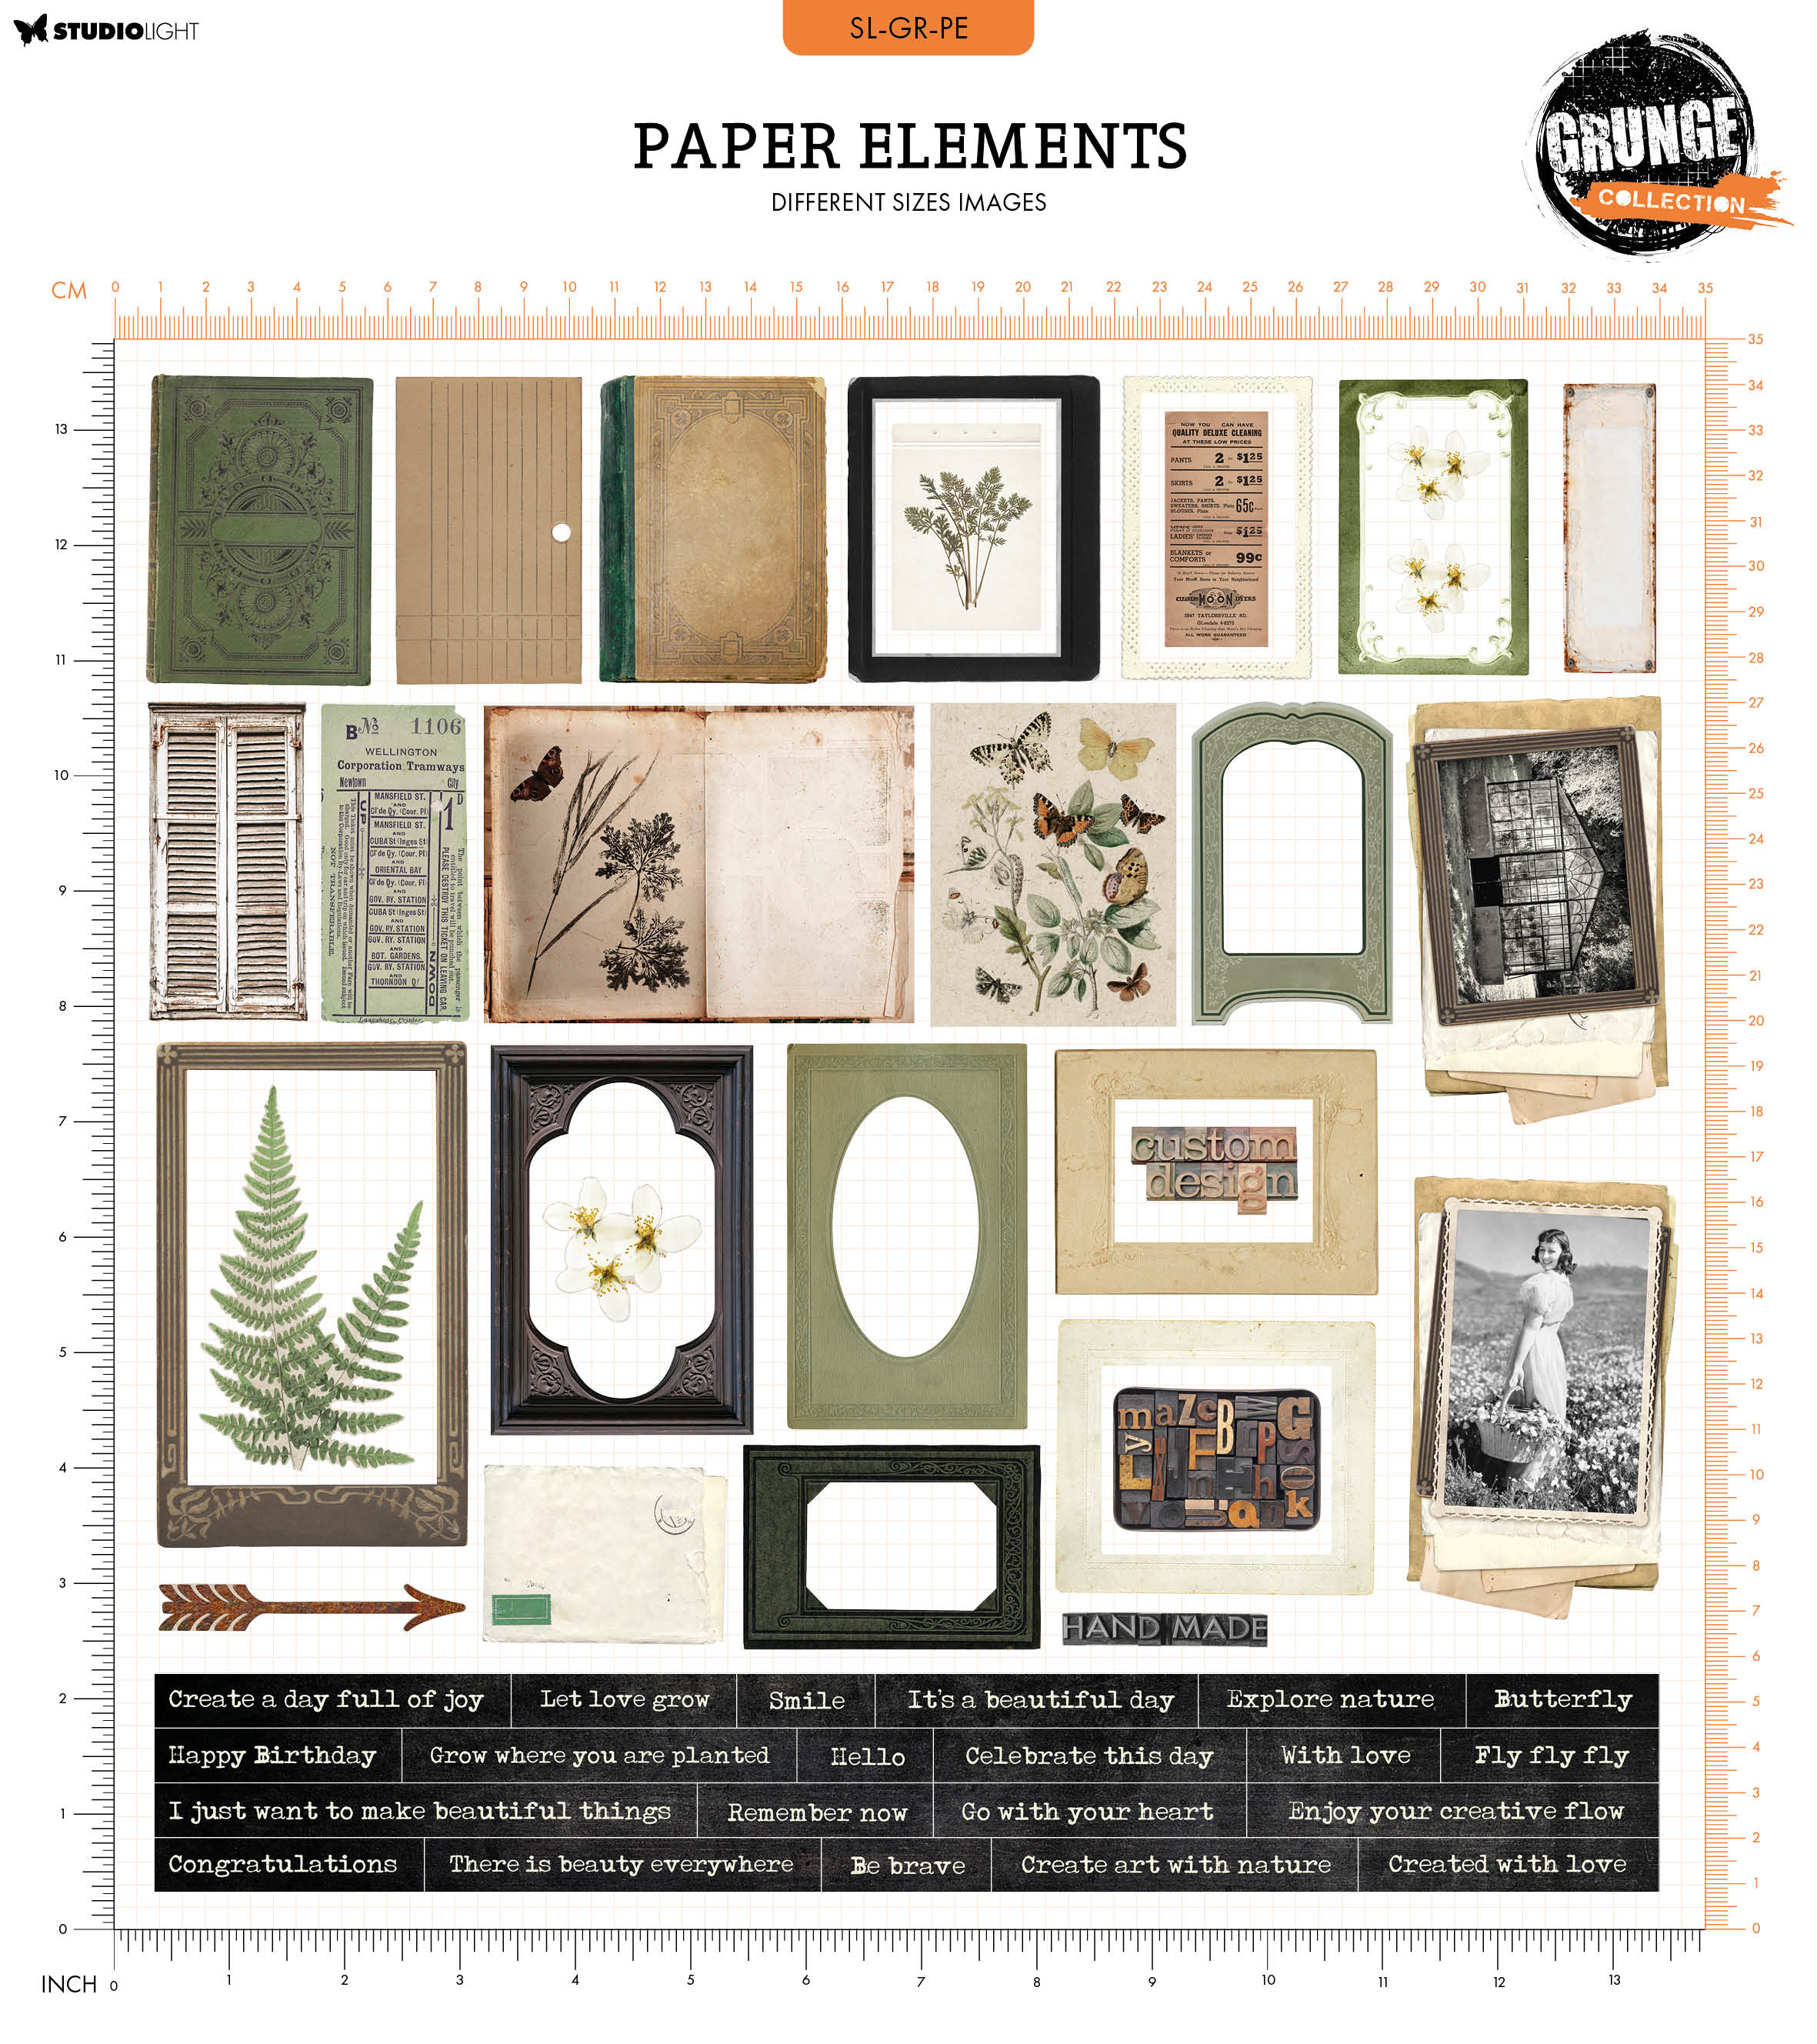 SL Paper Elements Frames & Texts Grunge Collection 52 PC